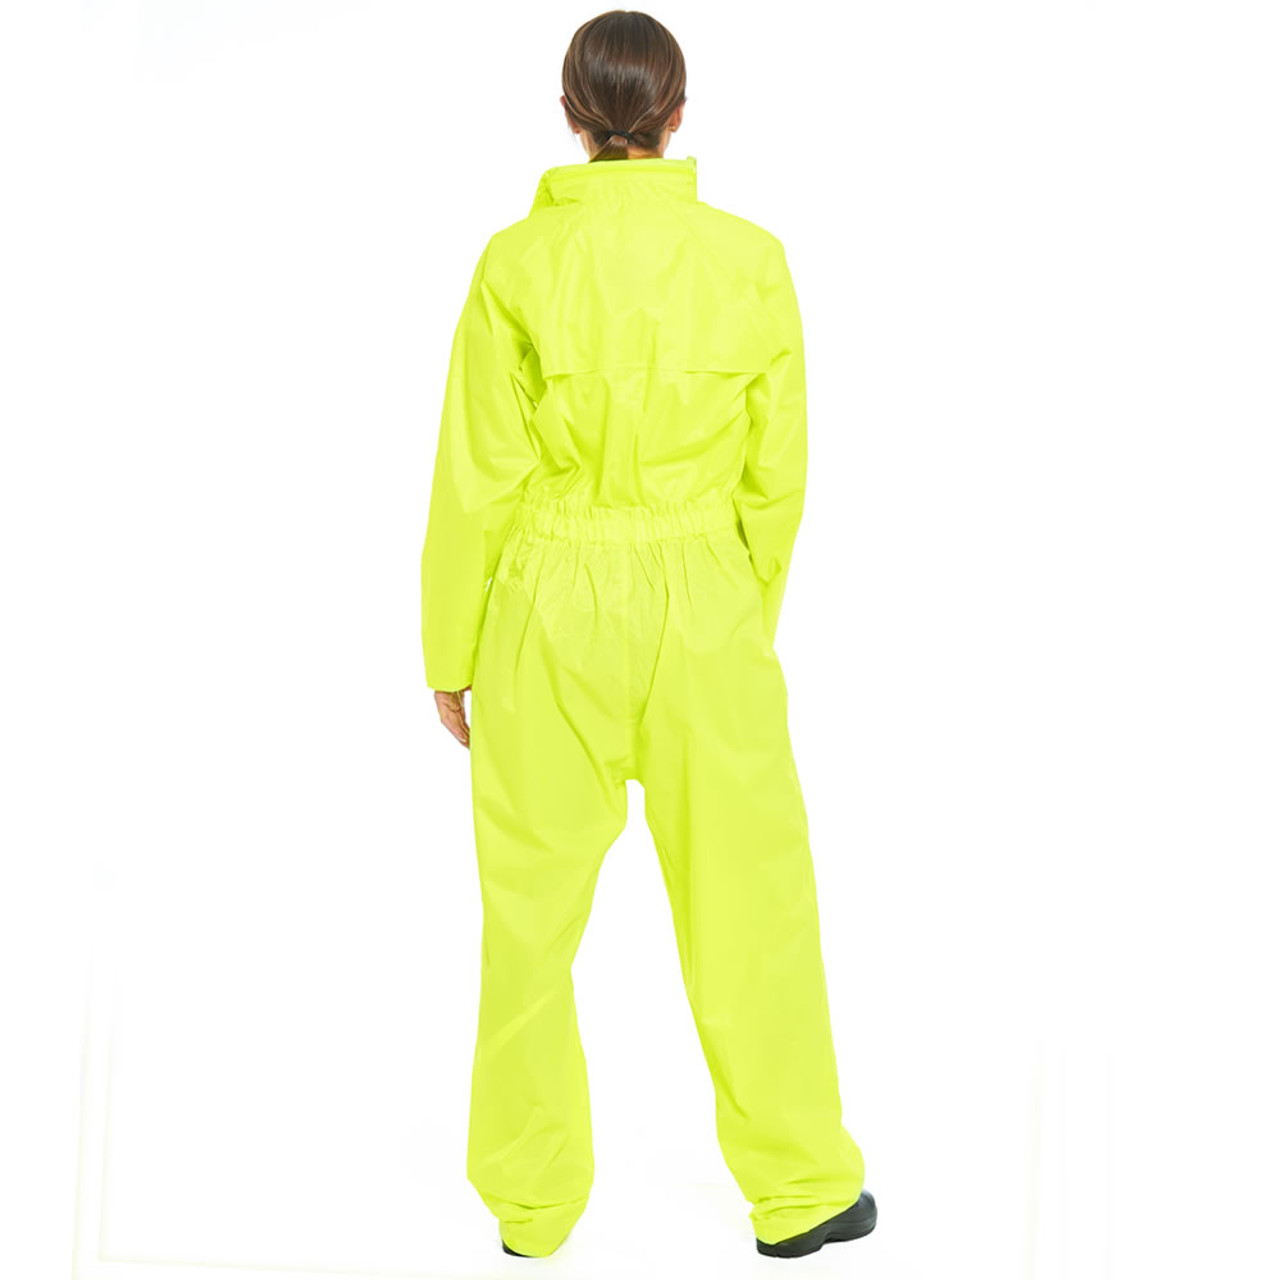 Endurance Pro Waterproof Coverall Yellow, Boilersuits & Coveralls, Protective Workwear, Clothing & Workwear, WBT Wholesale